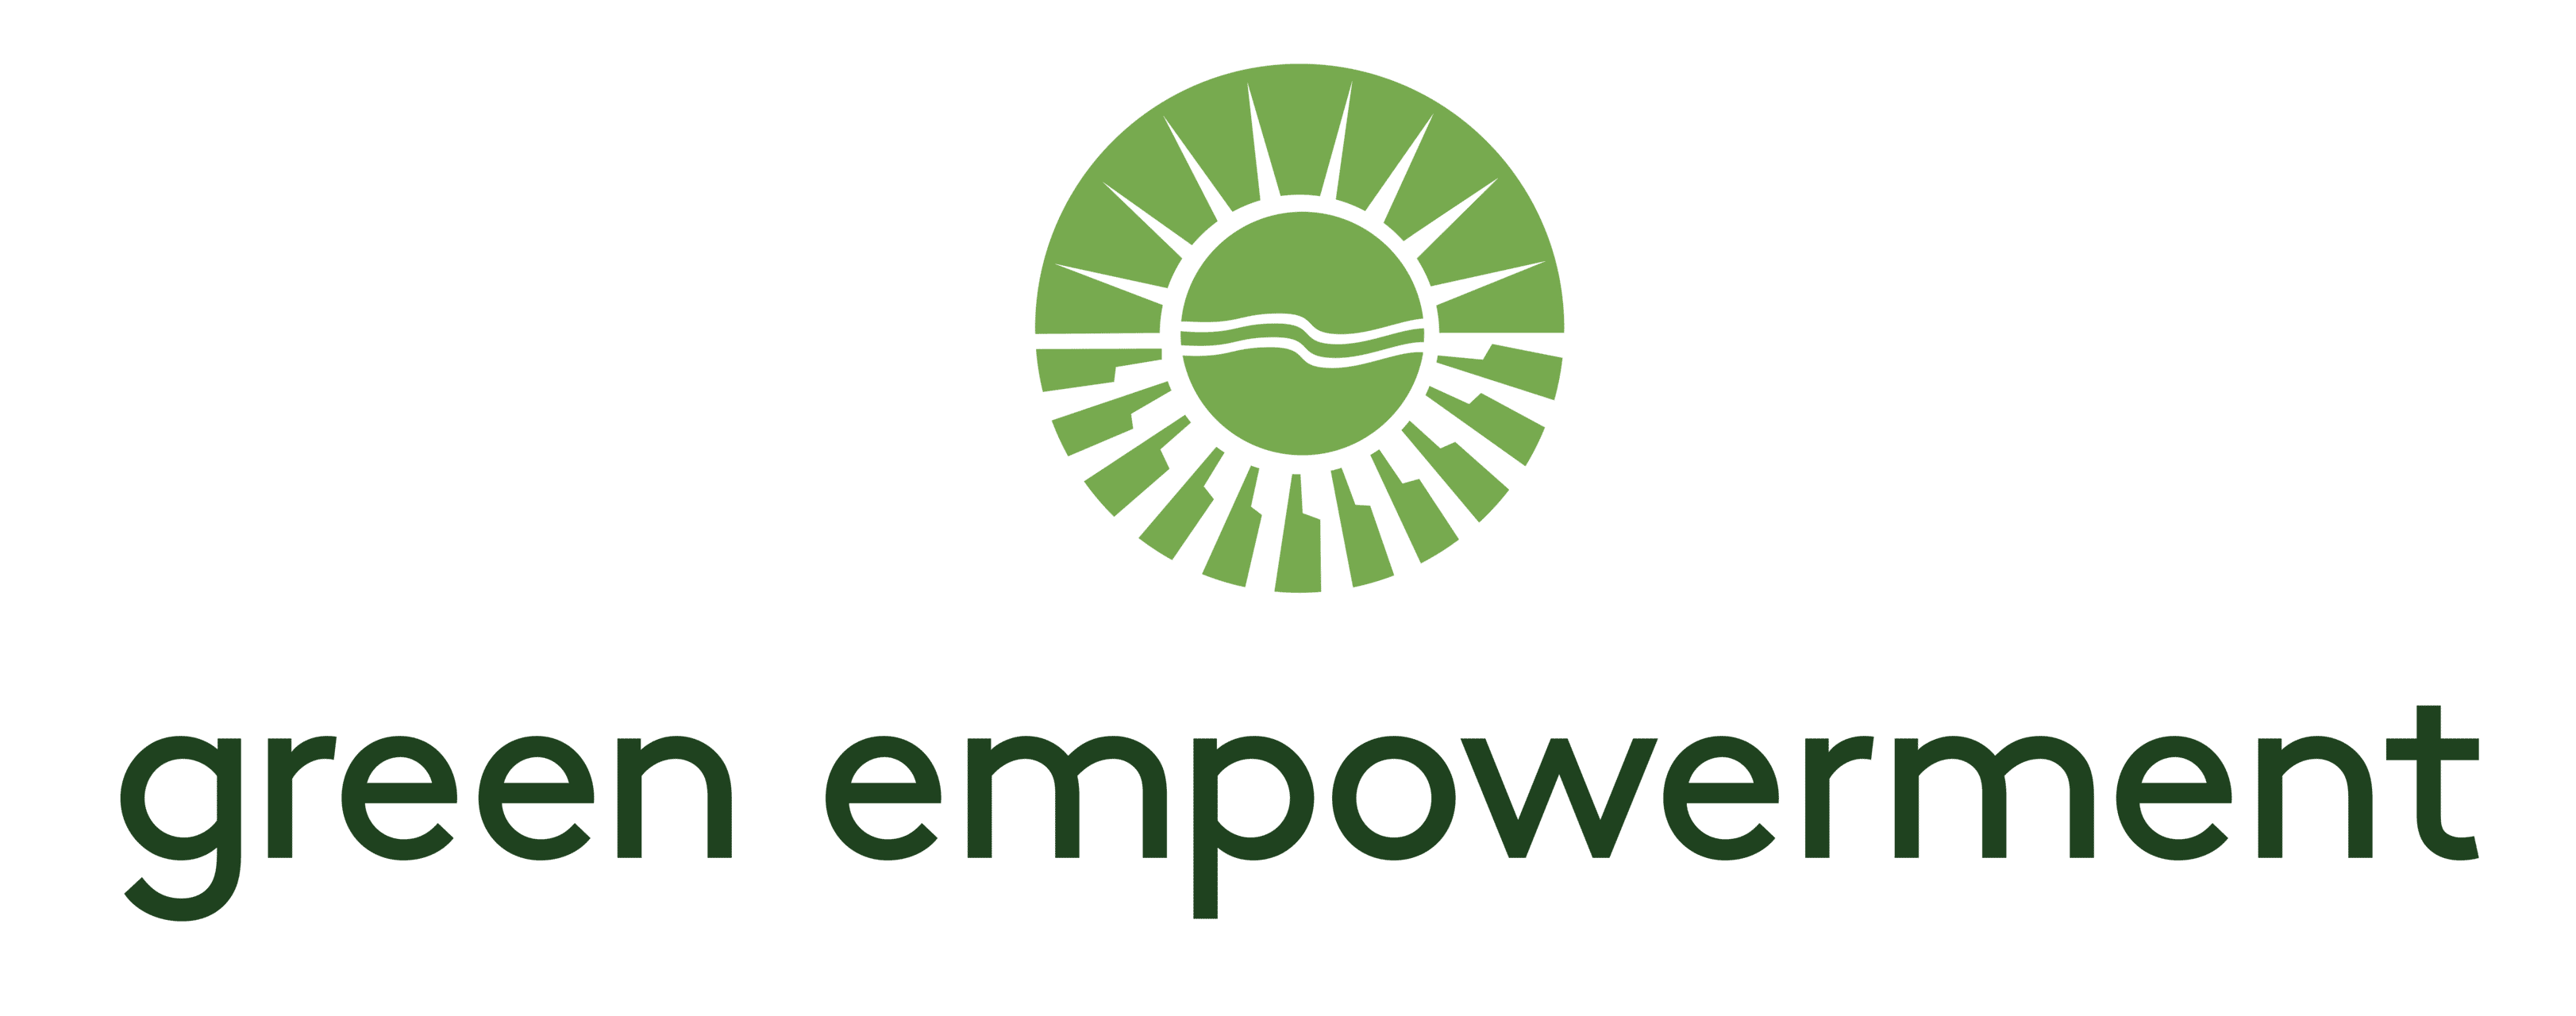 Green Empowerment Logo 2021_Stacked_High Res (1)